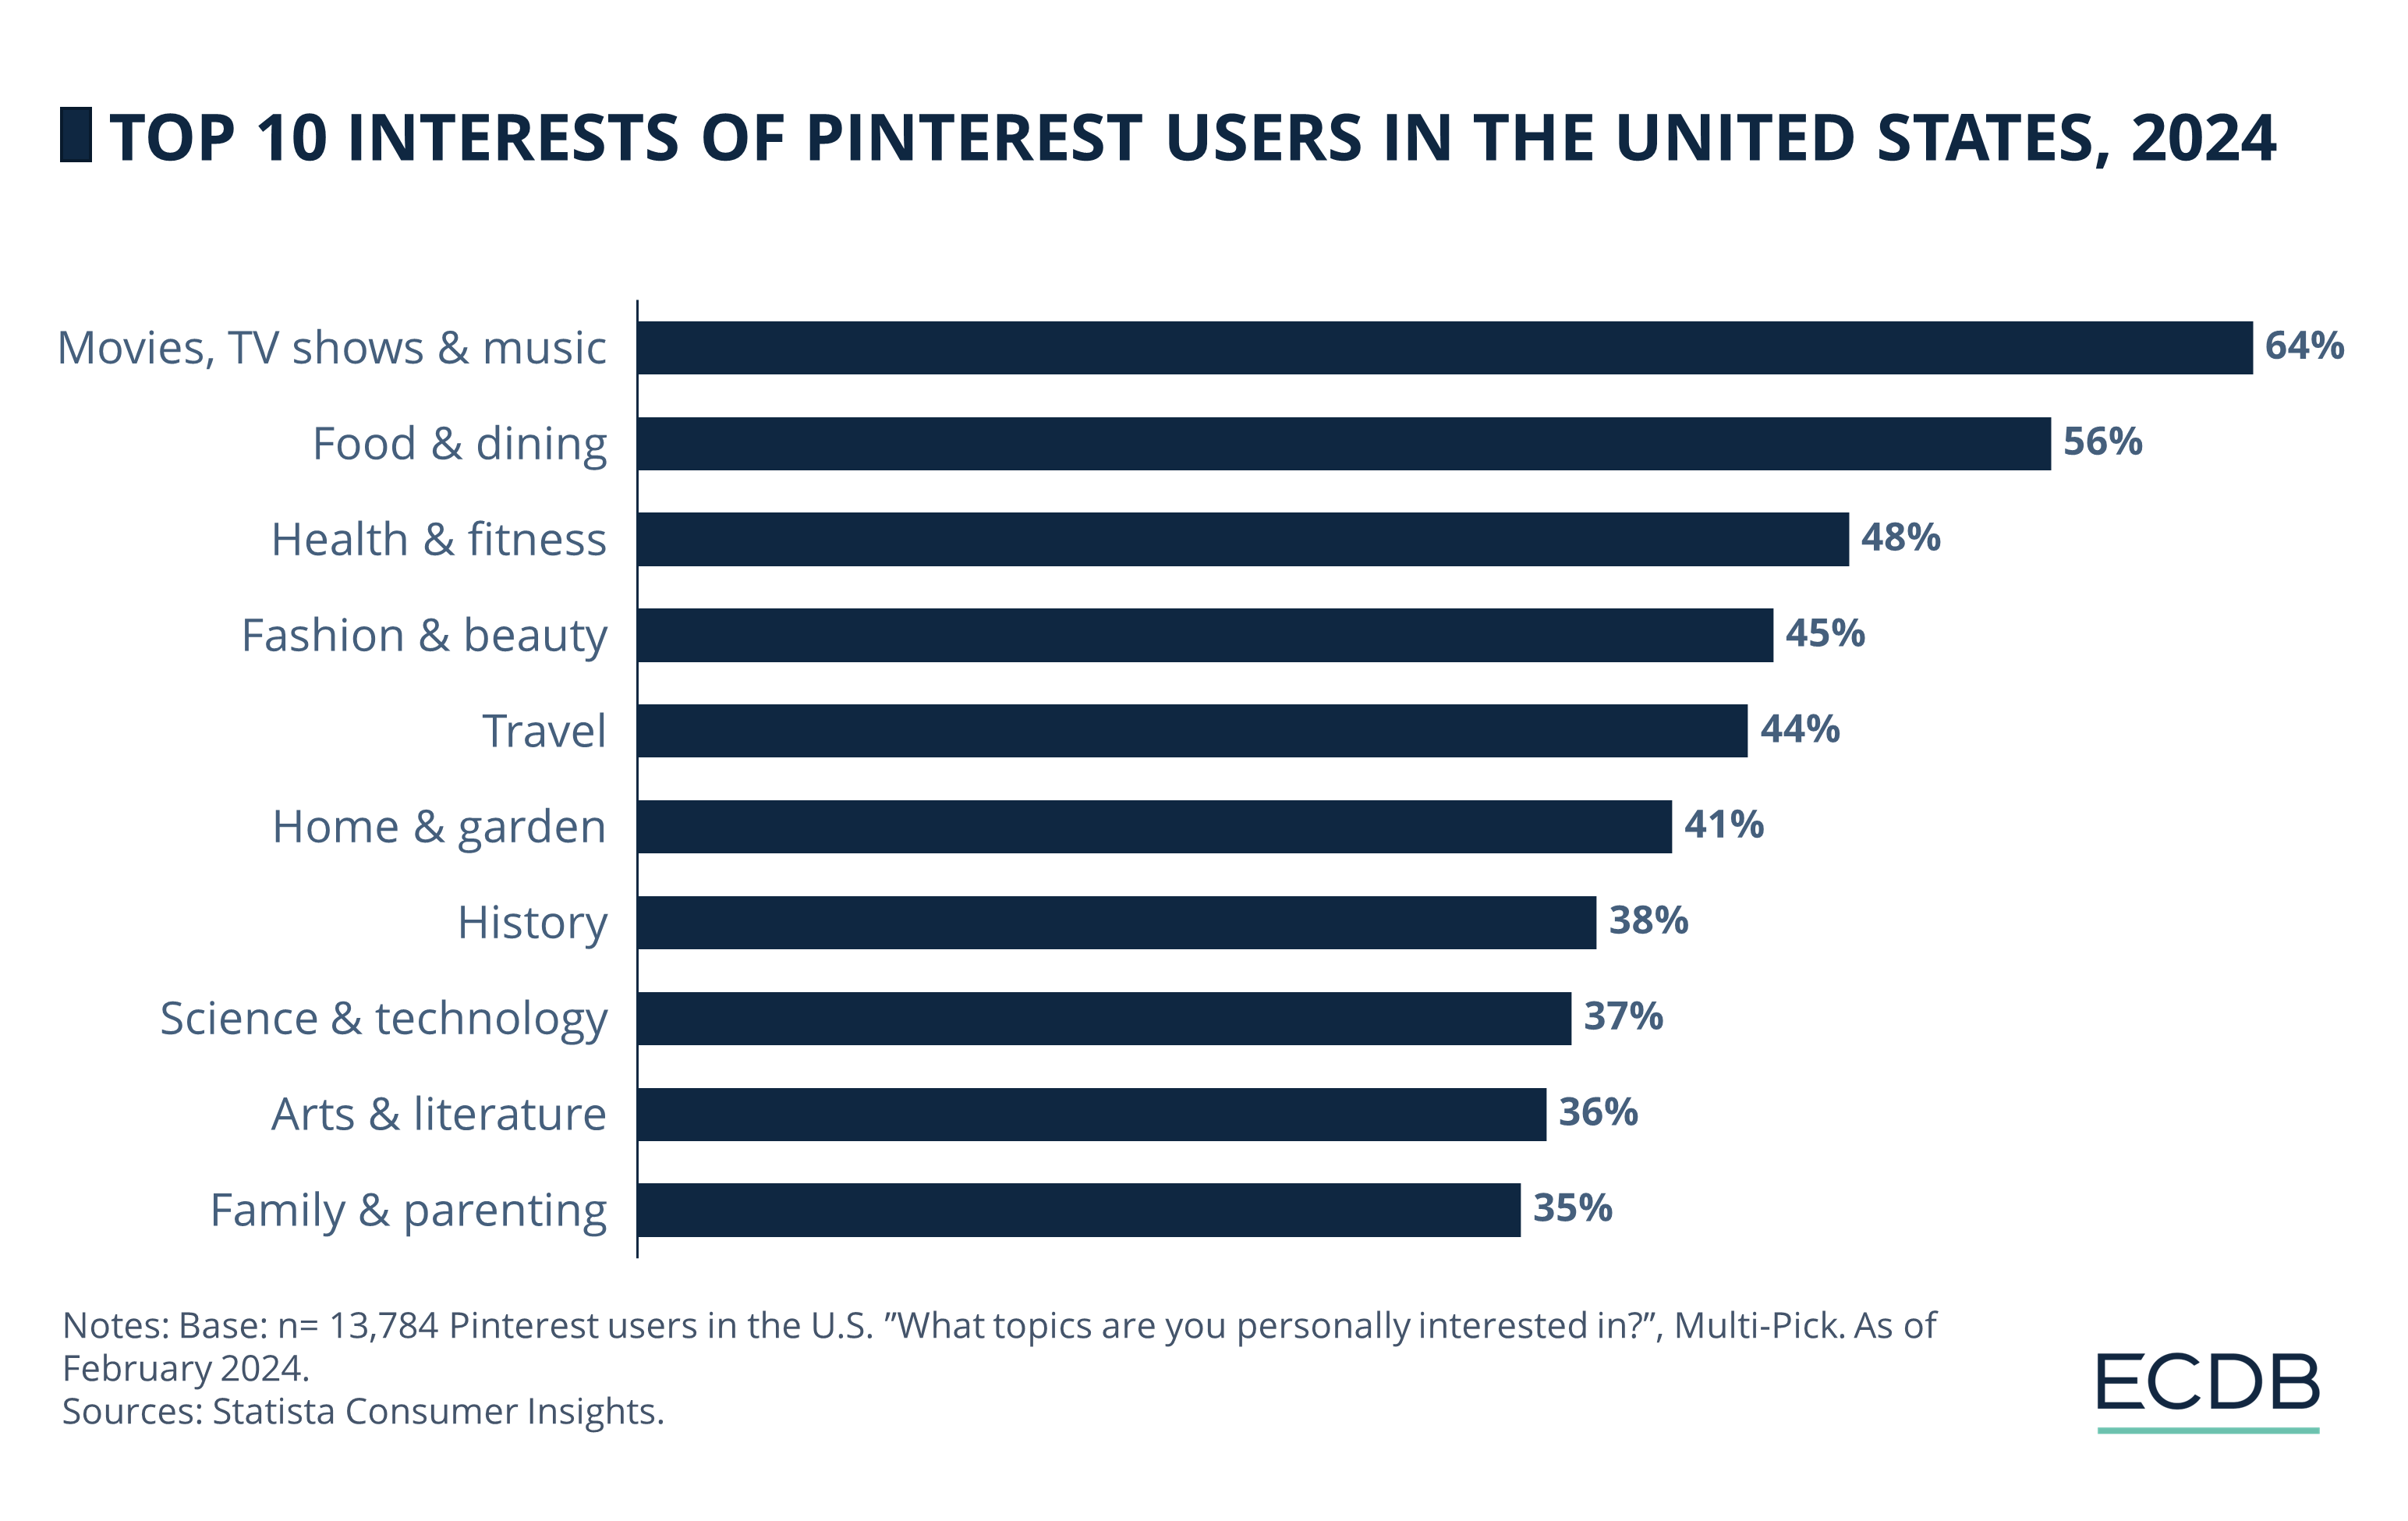 Top 10 Interests of Pinterest Users in the United States, 2024